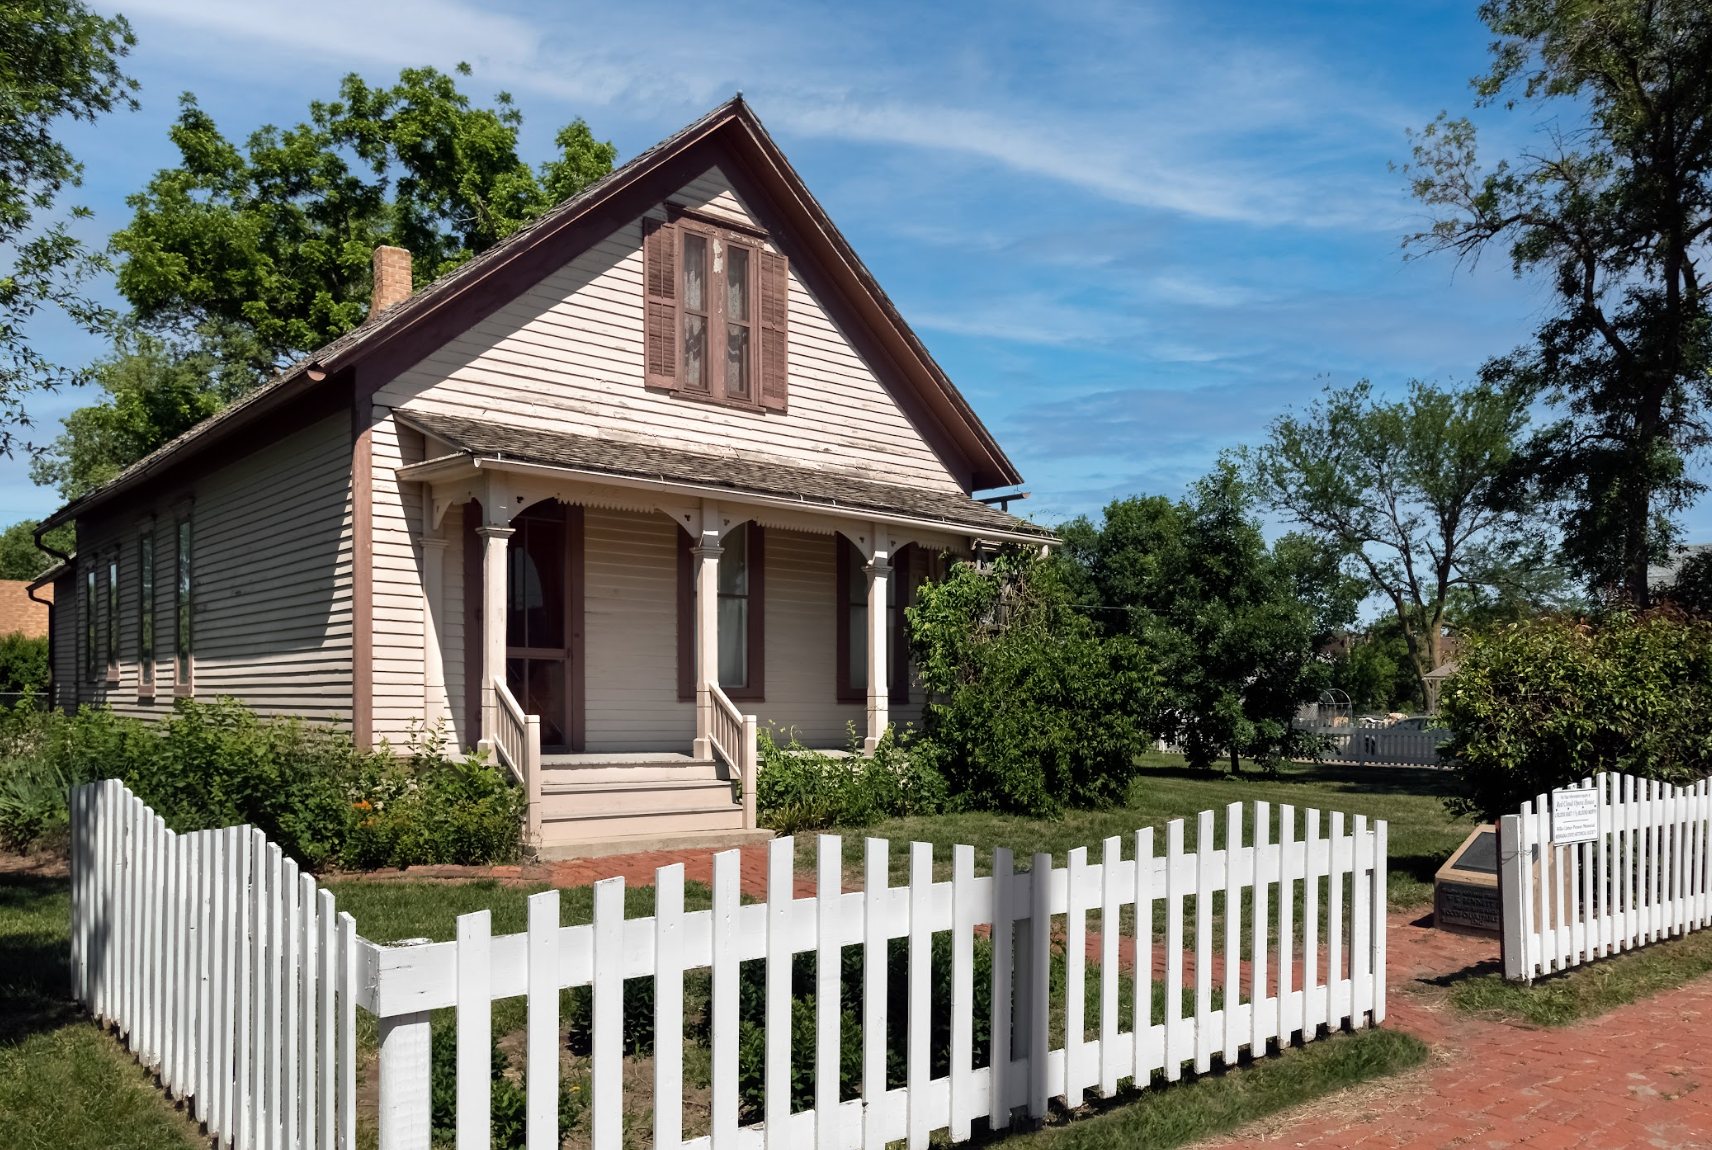 Exterior of the Willa Cather Childhood Home, surrounded by a picket fence